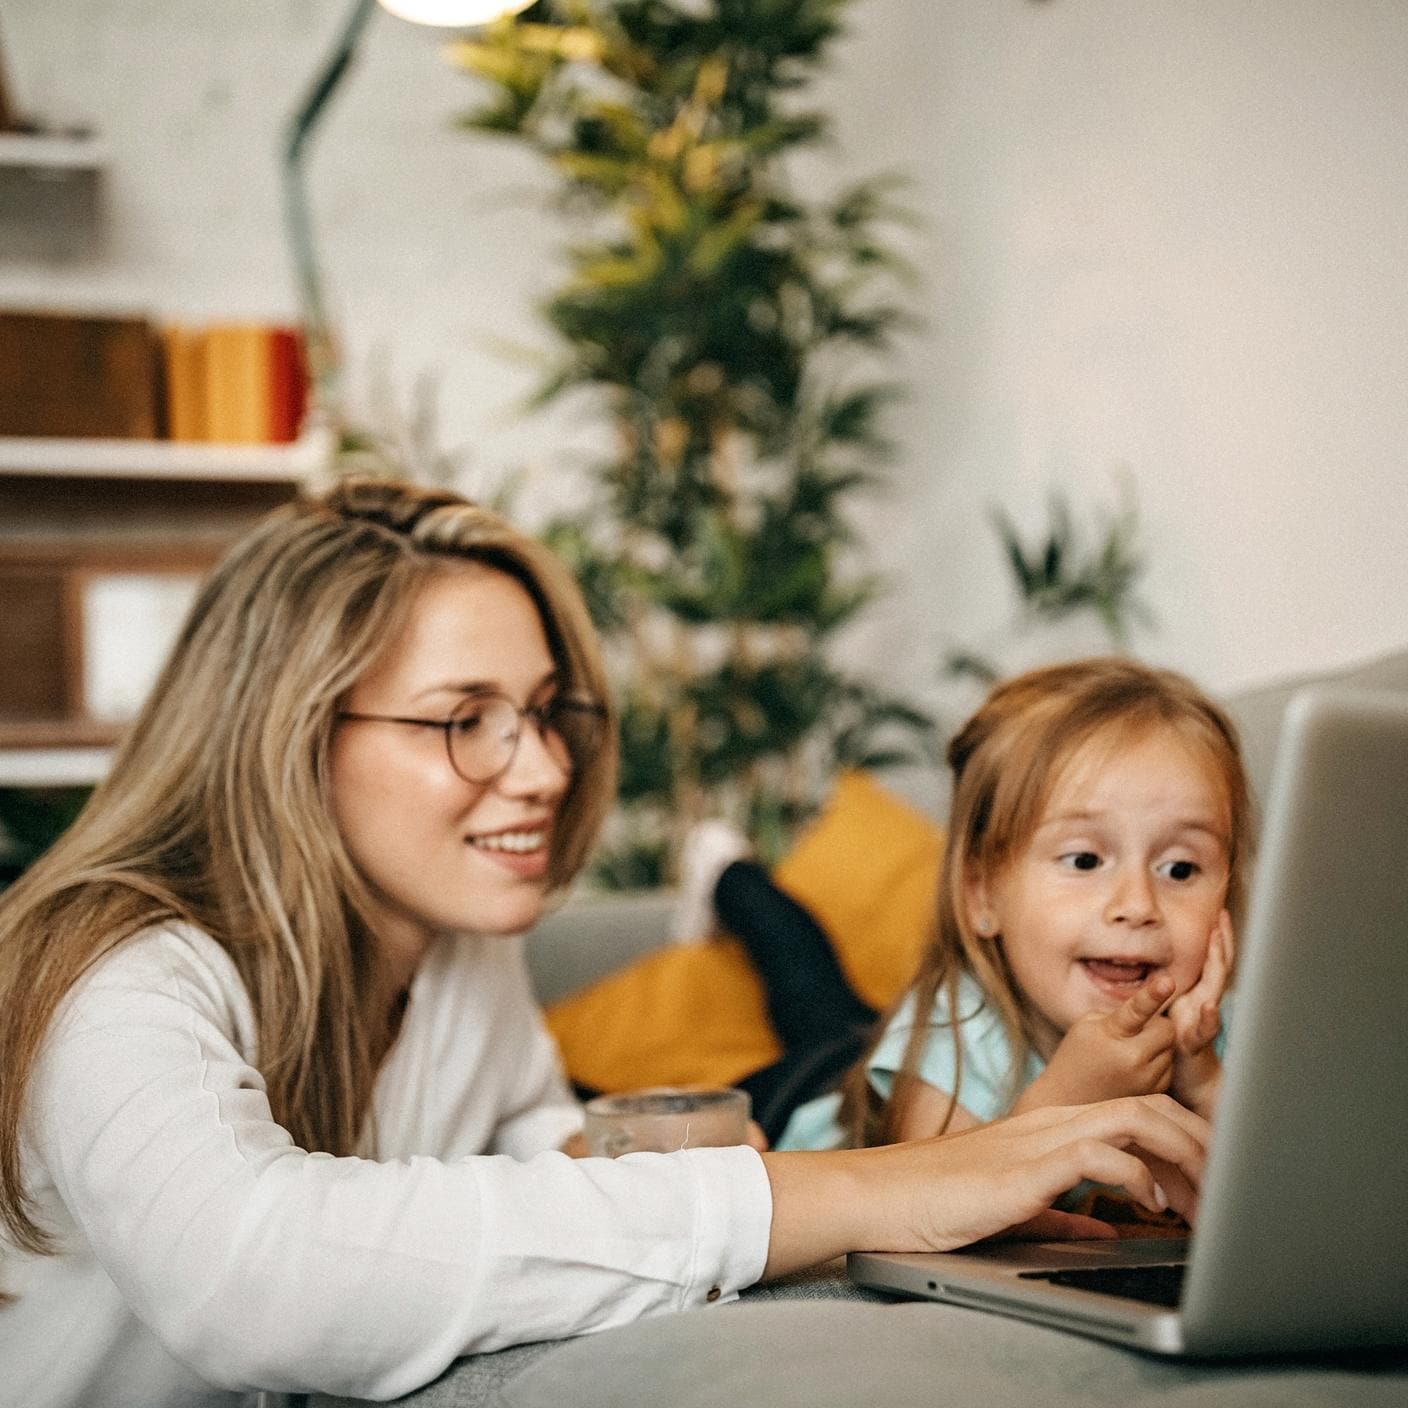 Telesoft Technologies made standards key to strategy - Mother and daughter using laptop together